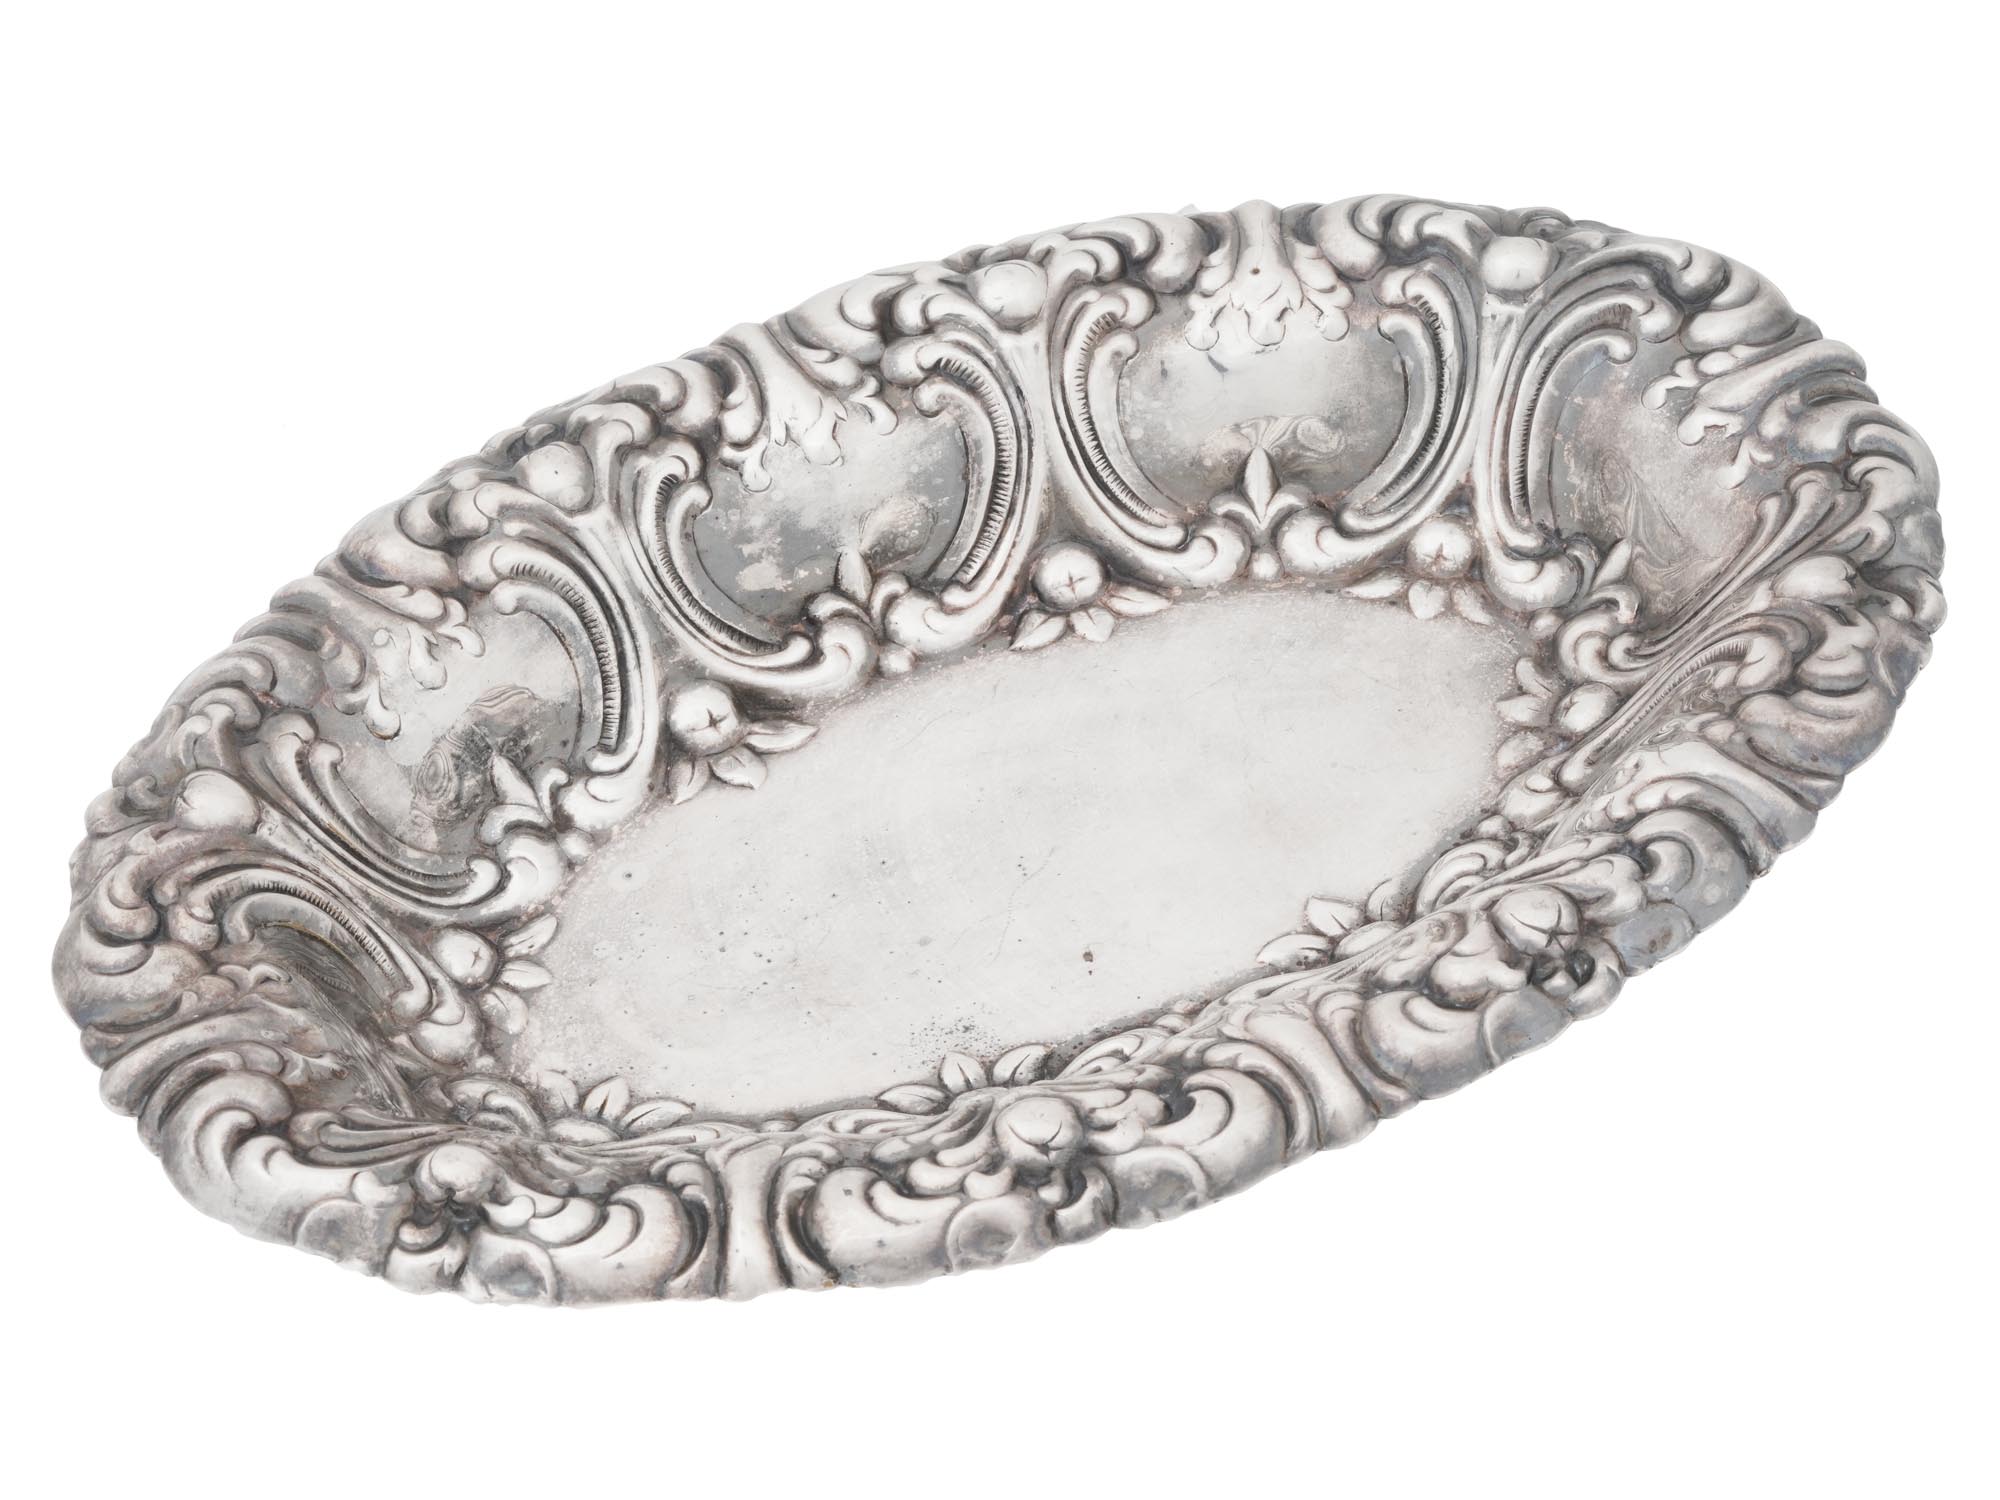 VINTAGE AMERICAN GORHAM REPOUSSE SILVER PLATE TRAY PIC-2